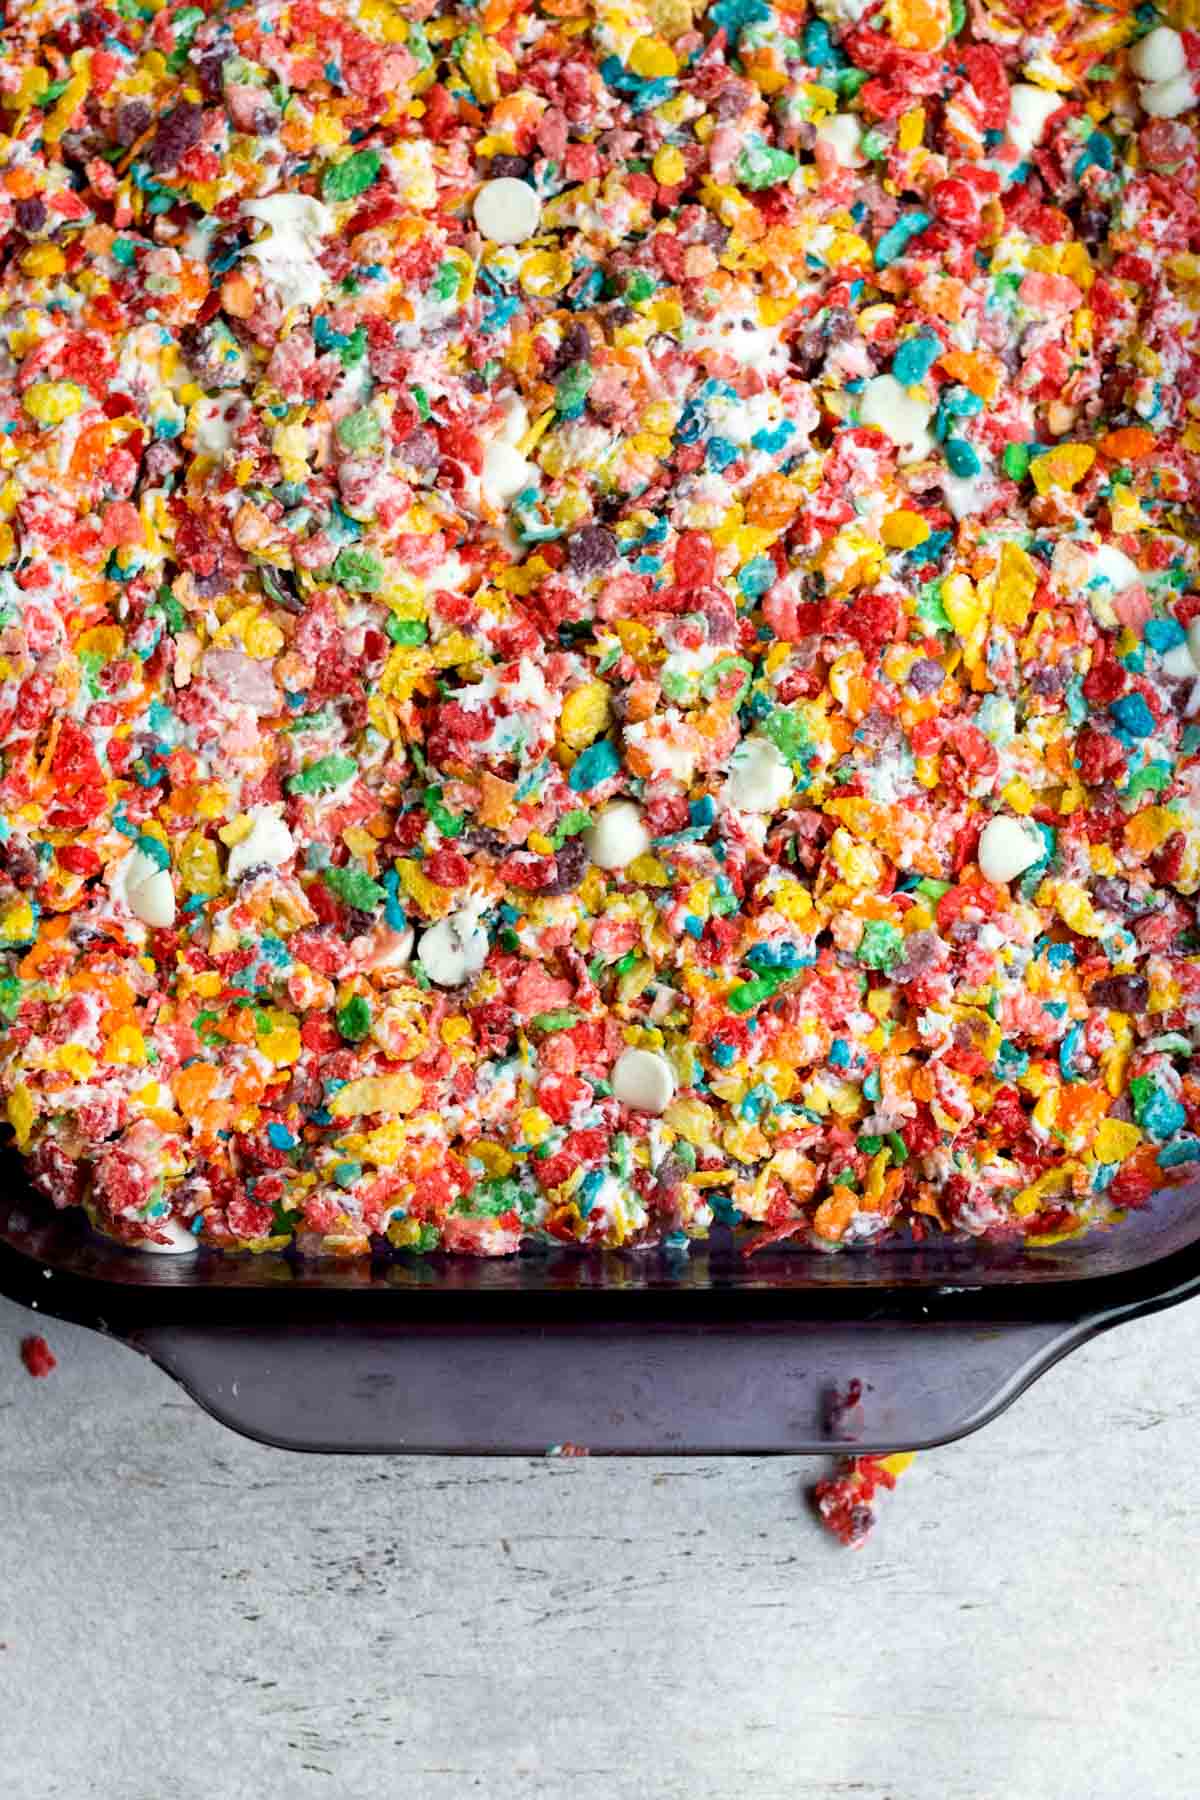 Filling a baking dish with the fruity pebbles mixture.